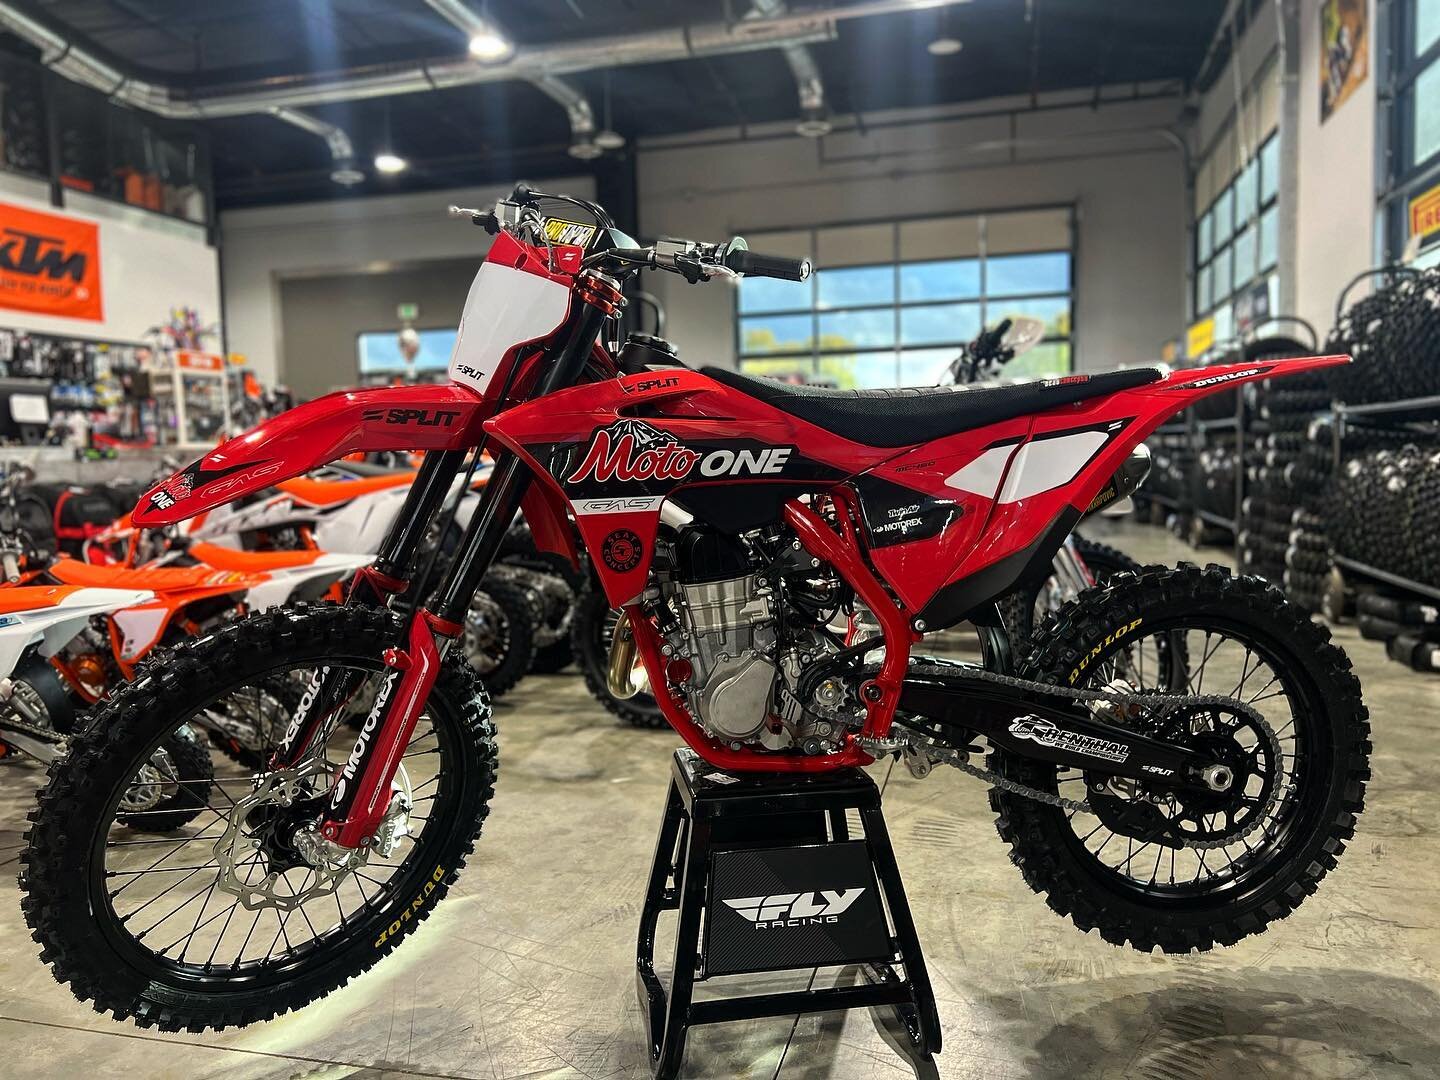 🤤

Make sure to stop by the @seatconcepts booth this weekend @enduro_cross and check out the Moto one edition MC450F. 

Yes it&rsquo;s for sale!🔥

@gasgas.official 
@seatconcepts 
@splitdesignsco 
@fbc_boise 
@dunlopmoto 
@protaper